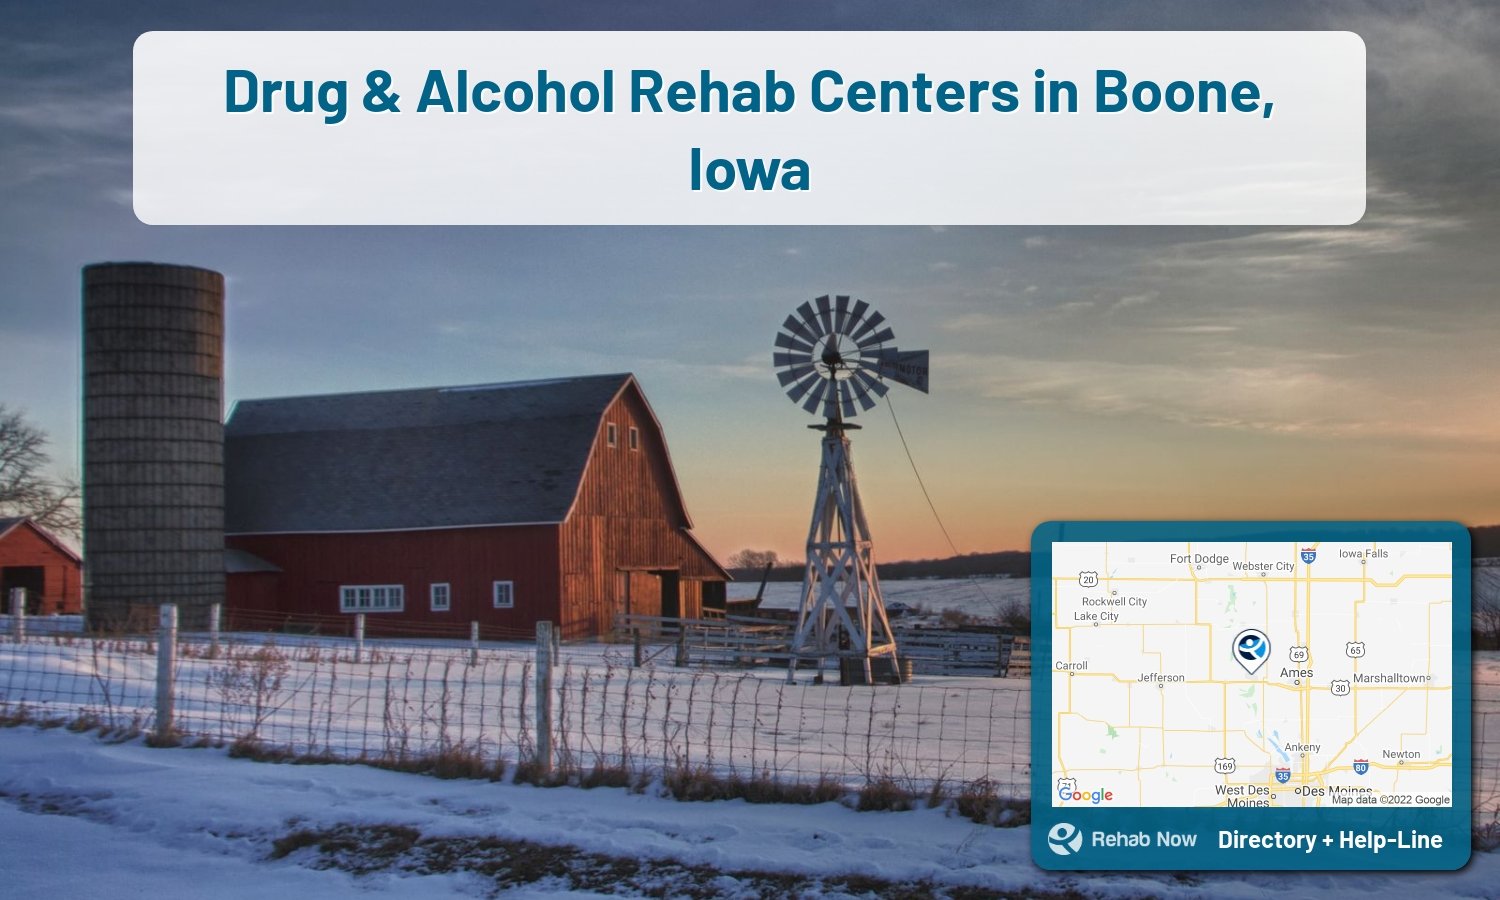 View options, availability, treatment methods, and more, for drug rehab and alcohol treatment in Boone, Iowa